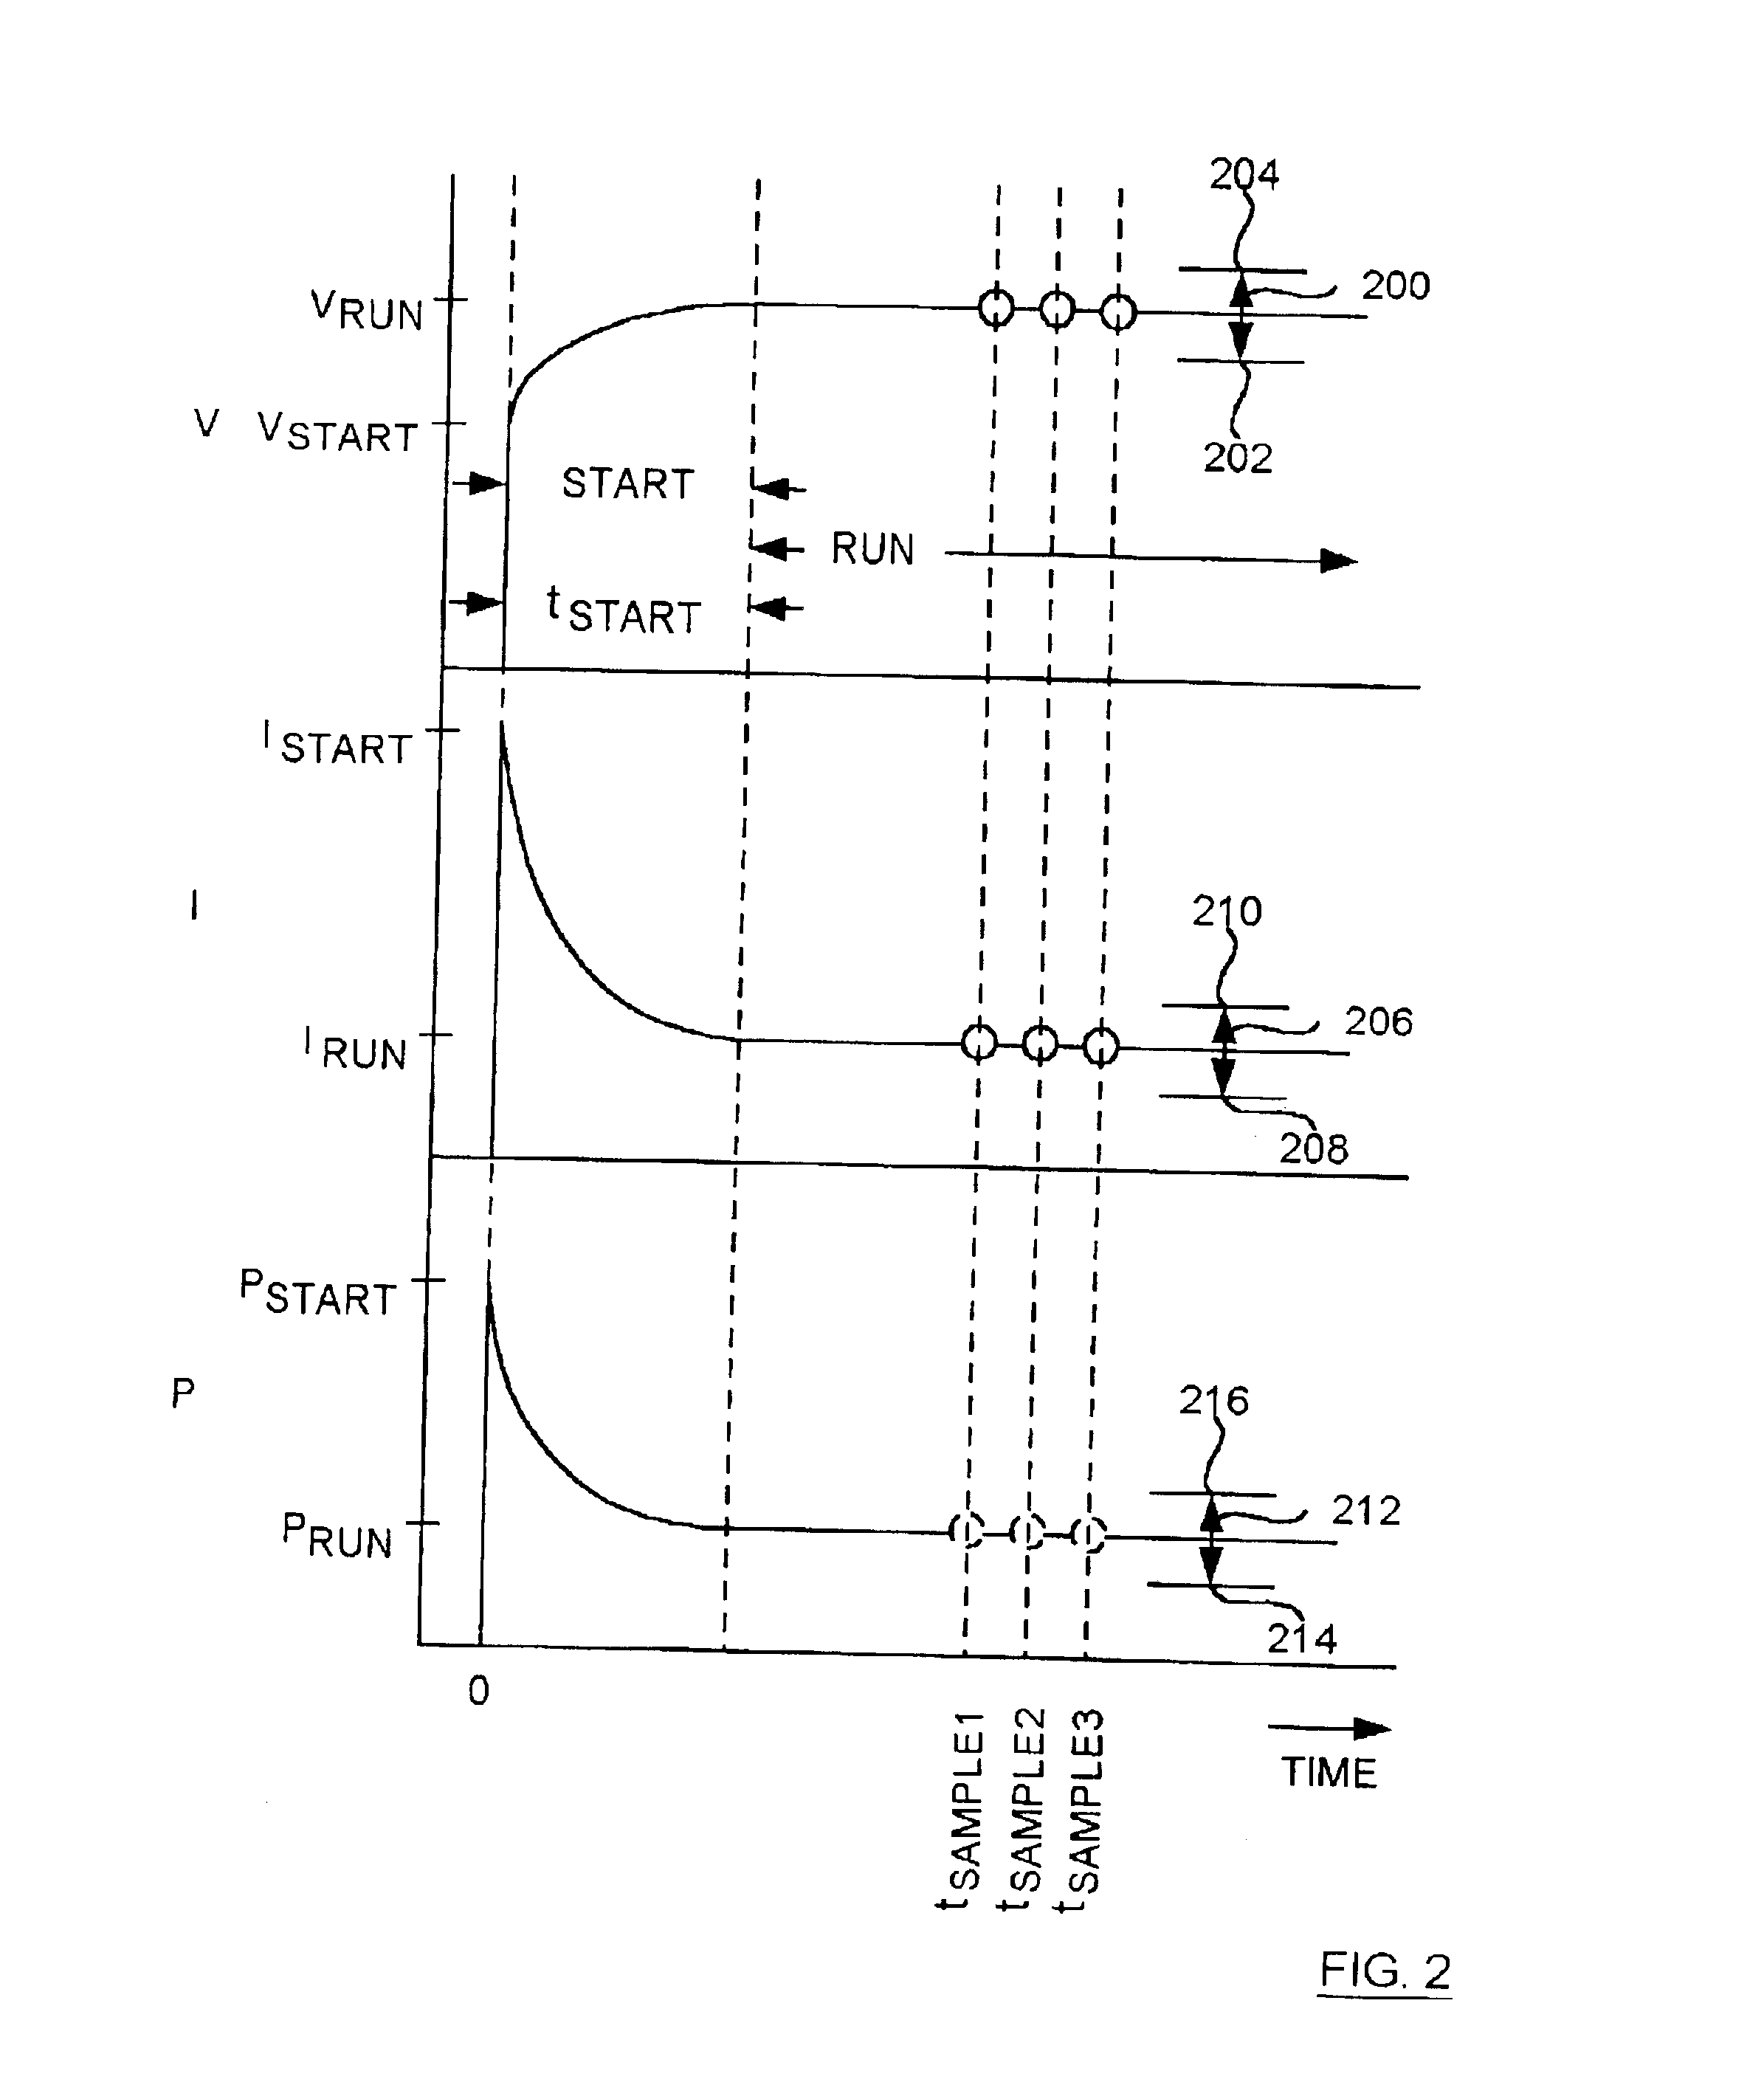 System and method for monitoring and indicating a condition of a filter element in a fluid delivery system